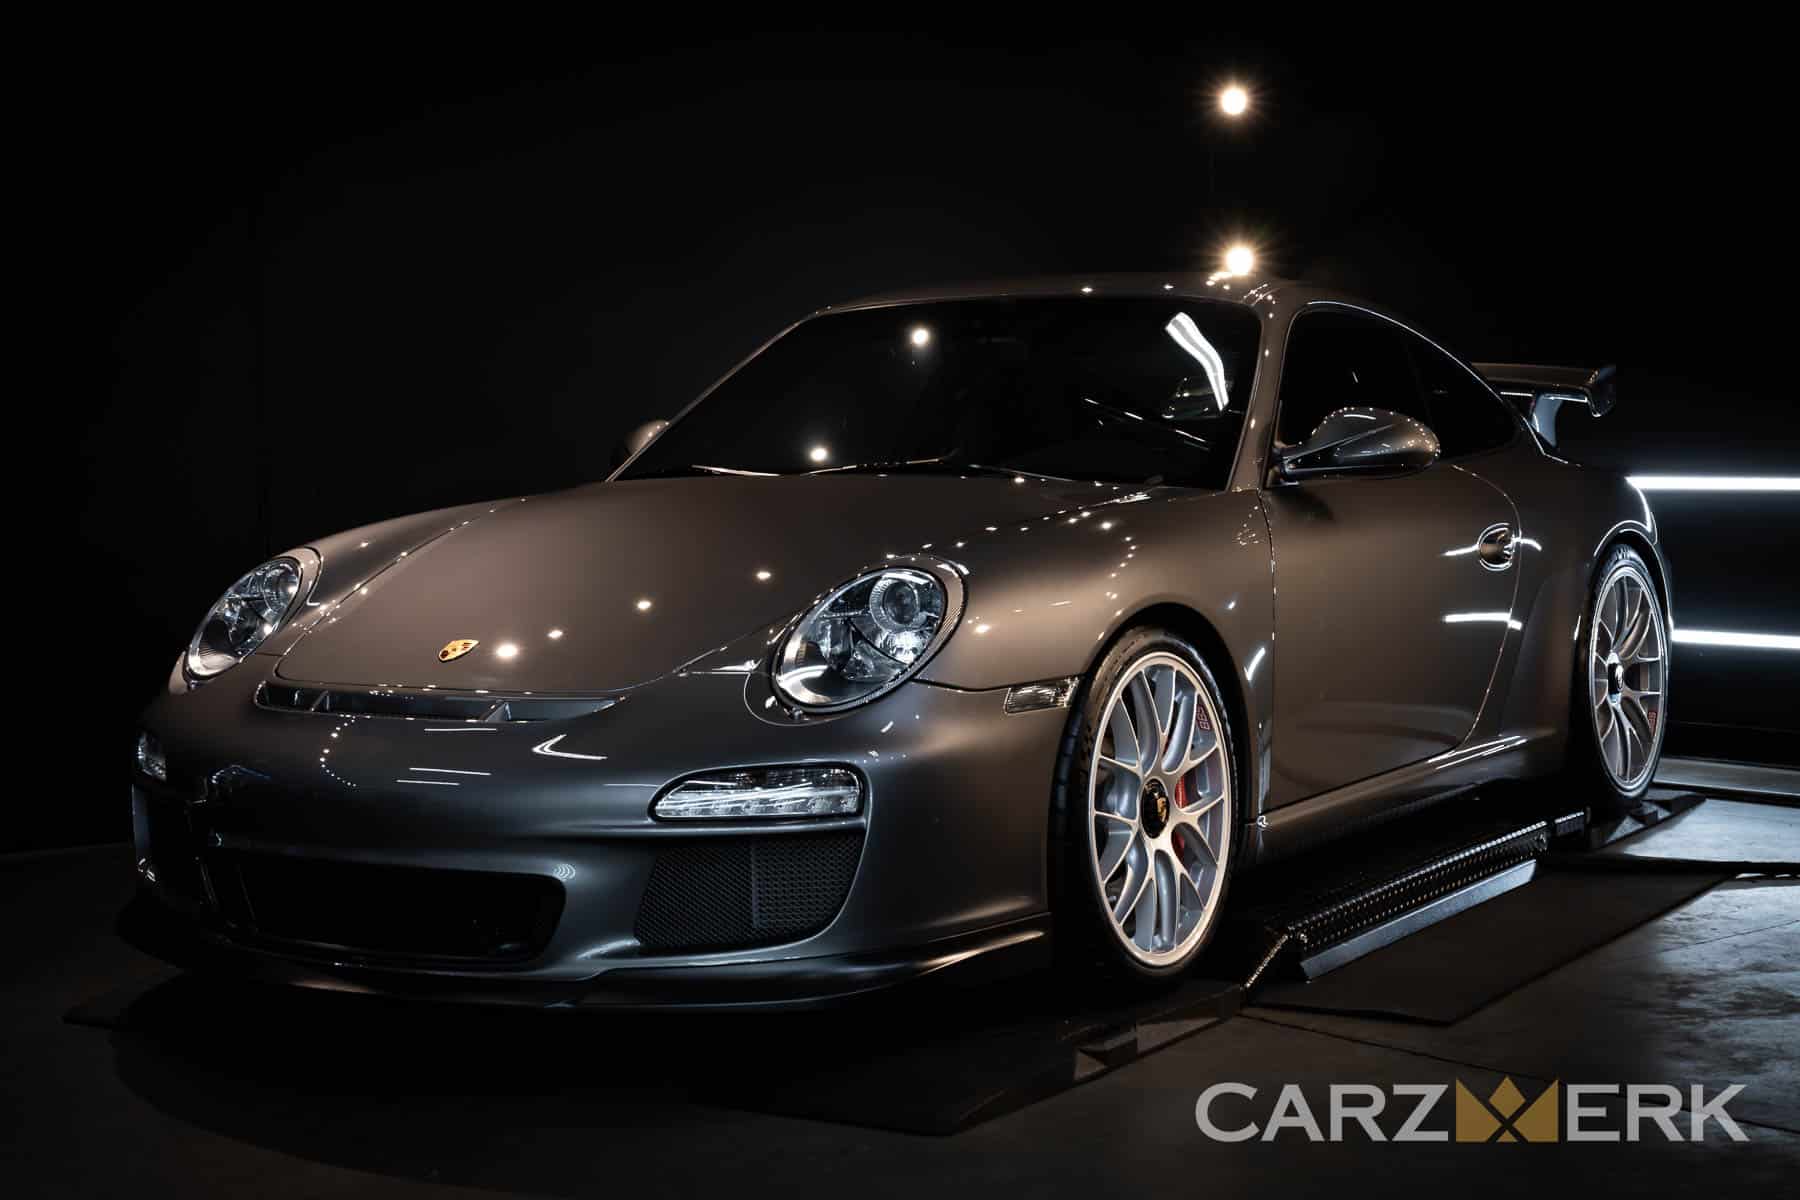 2011 Porsche 911 GT3 - Meteor Grey Metallic - After dry ice detailing, paint correction, paint protection film, ceramic coating